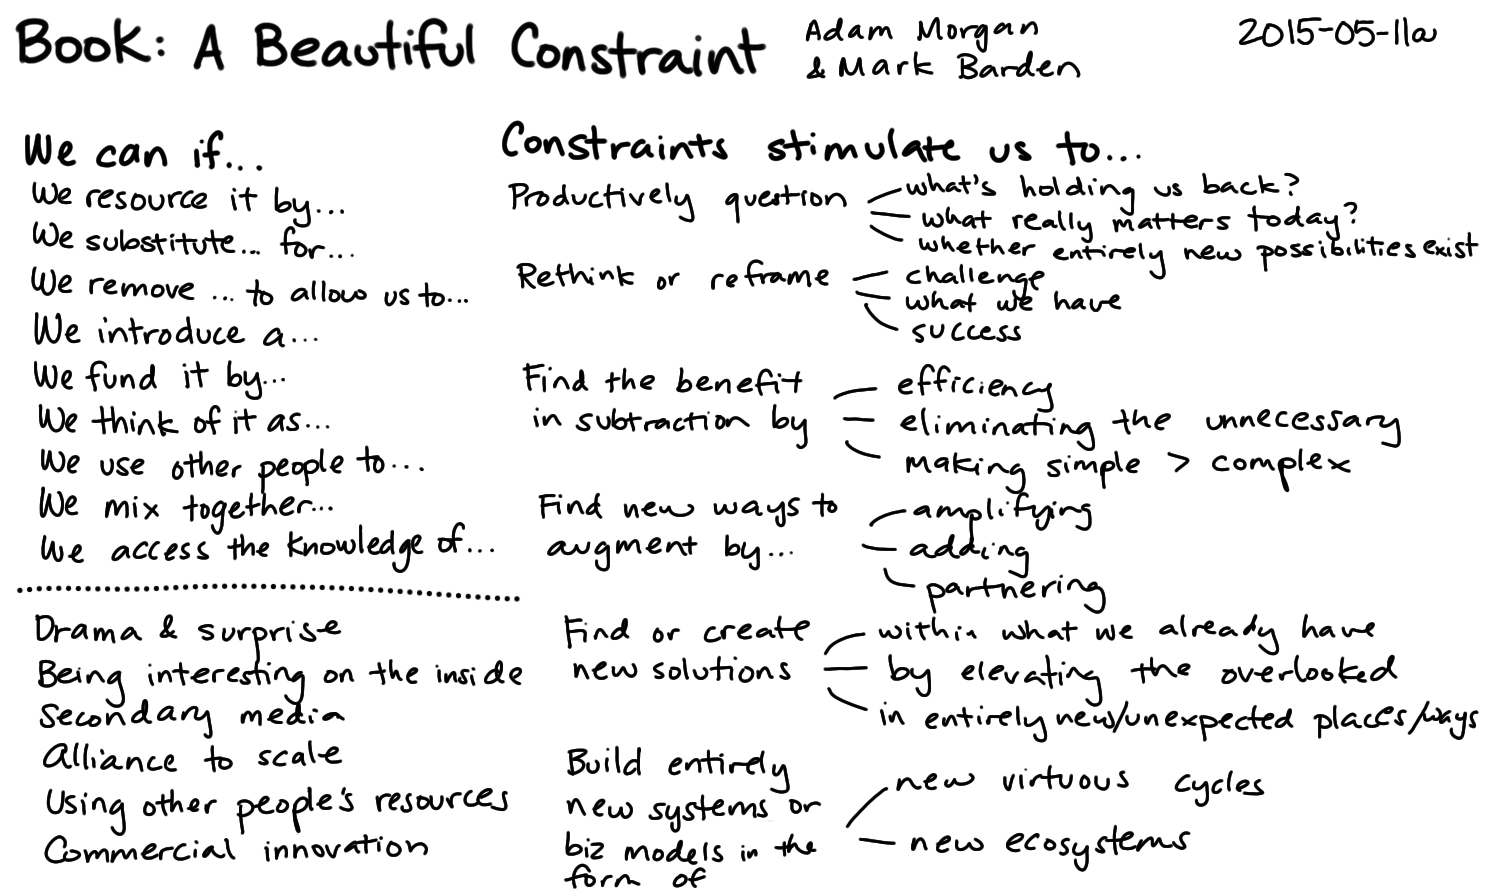 2015-05-11a Book - A Beautiful Constraint - Adam Morgan and Mark Barden -- index card #book #raw-book-notes.png